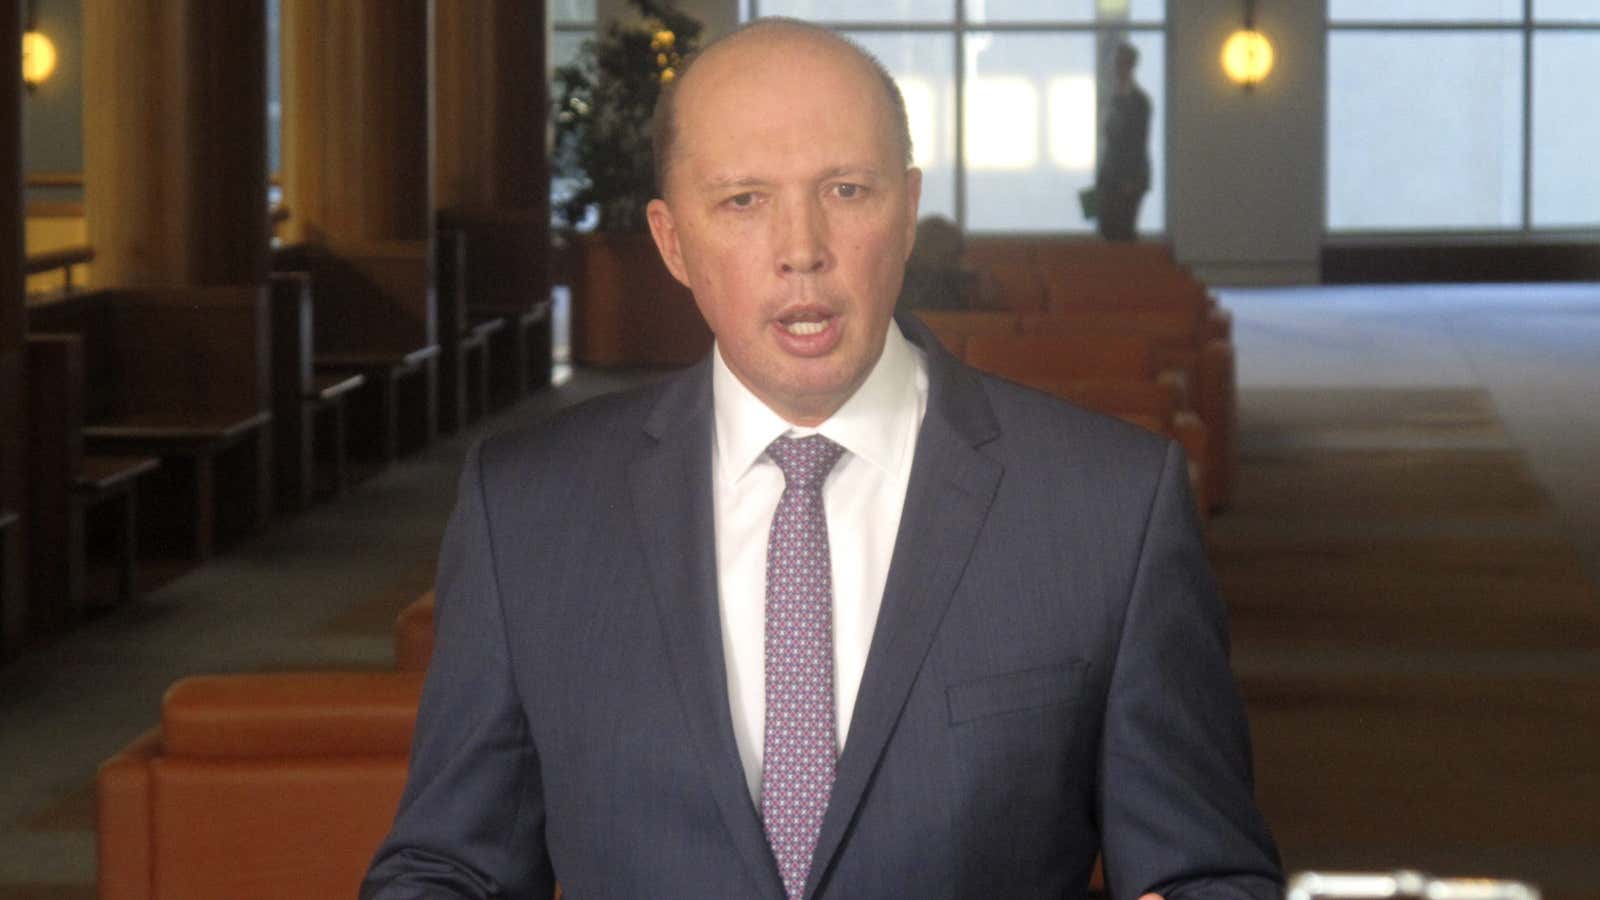 Australia’s Home Affairs Minister Peter Dutton appearing in 2017.